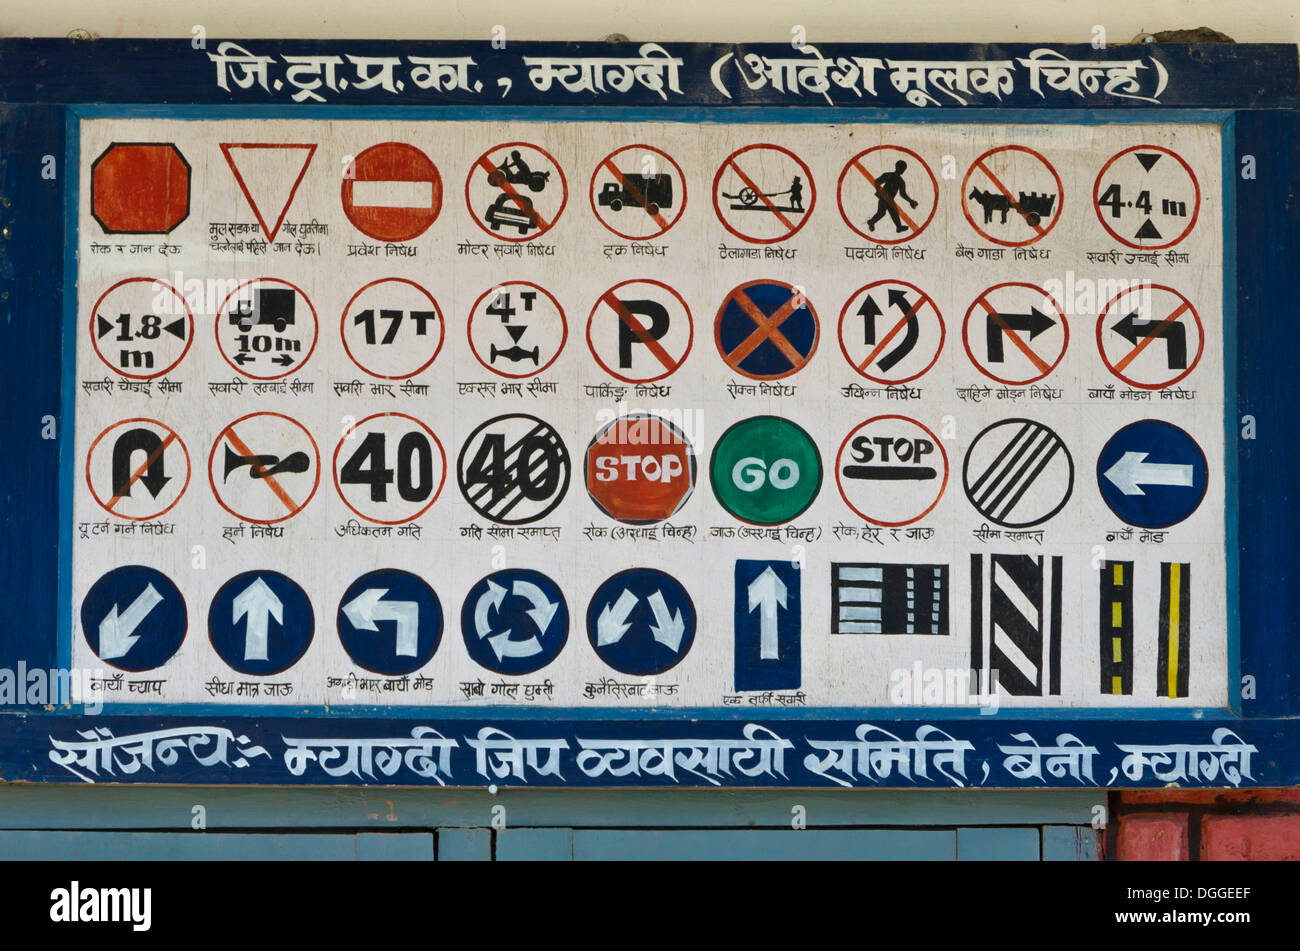 Roadsigns and traffic rules on a big plate, Beni, Myagdi district, Nepal Stock Photo